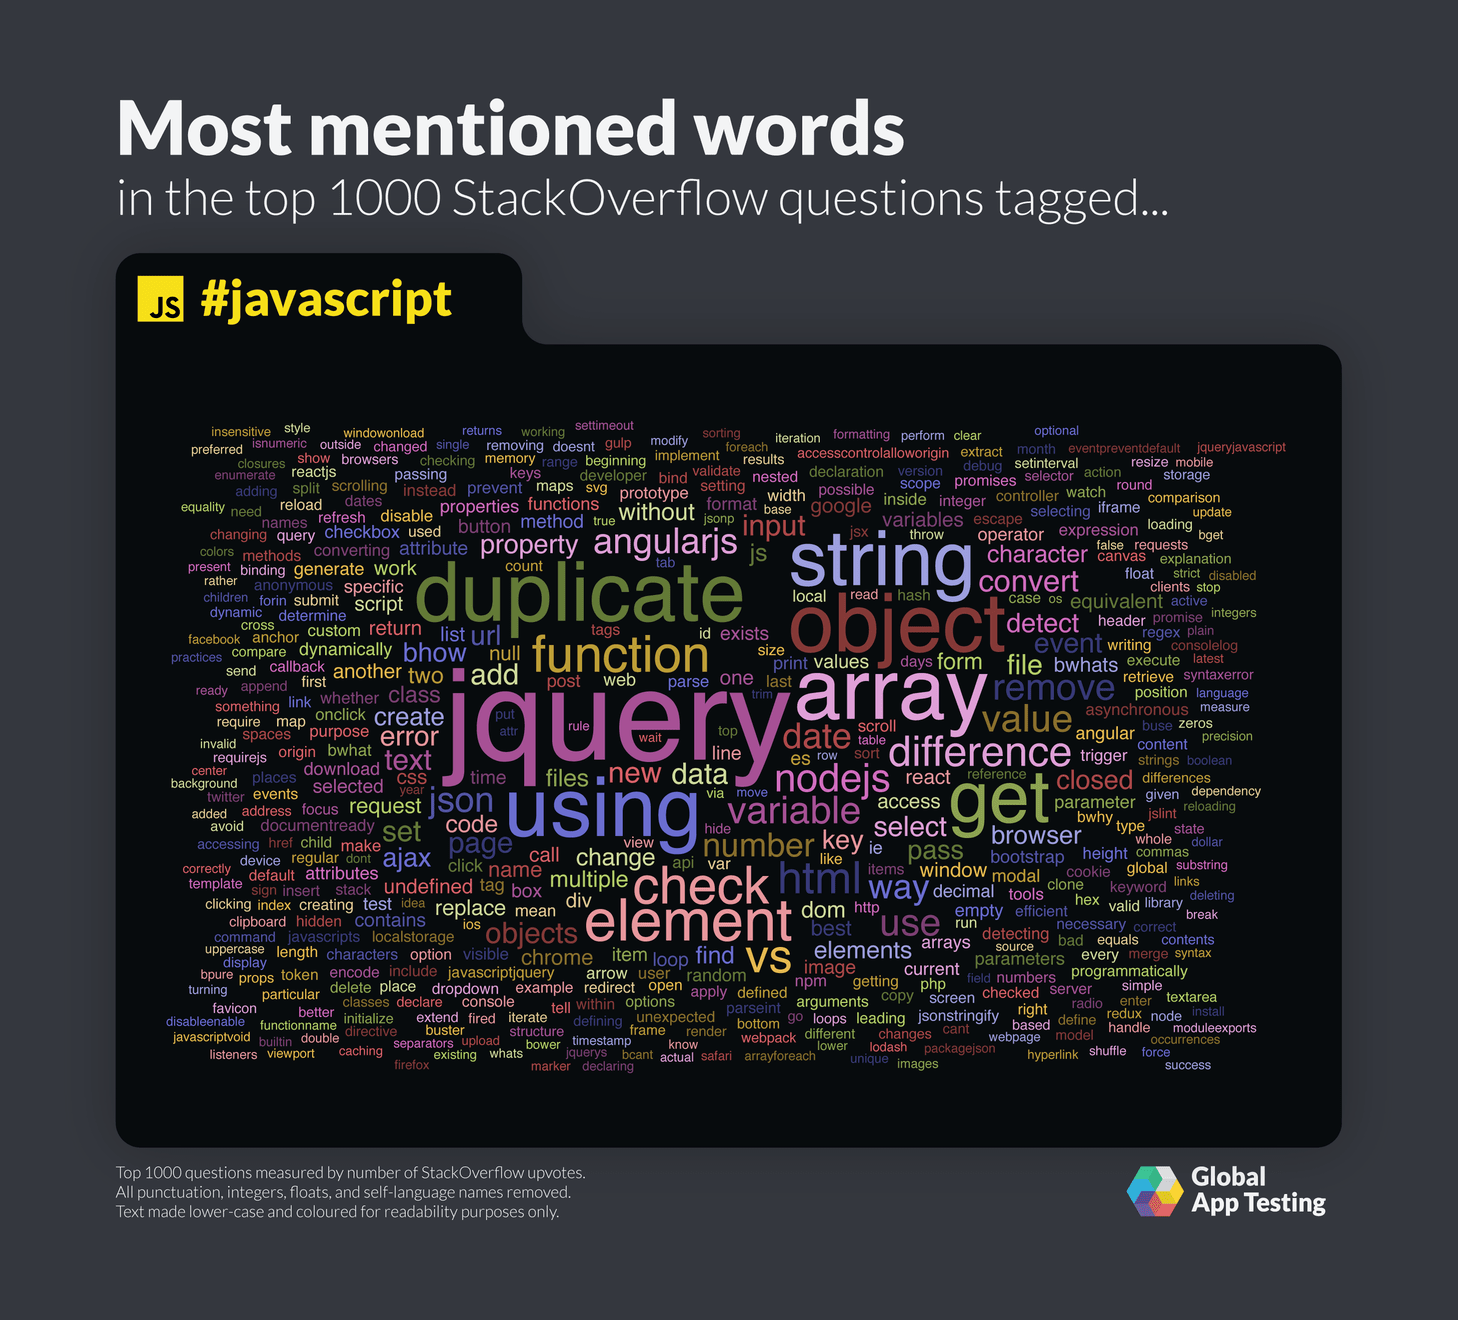 Most mentioned words for JavaScript on StackOverflow.